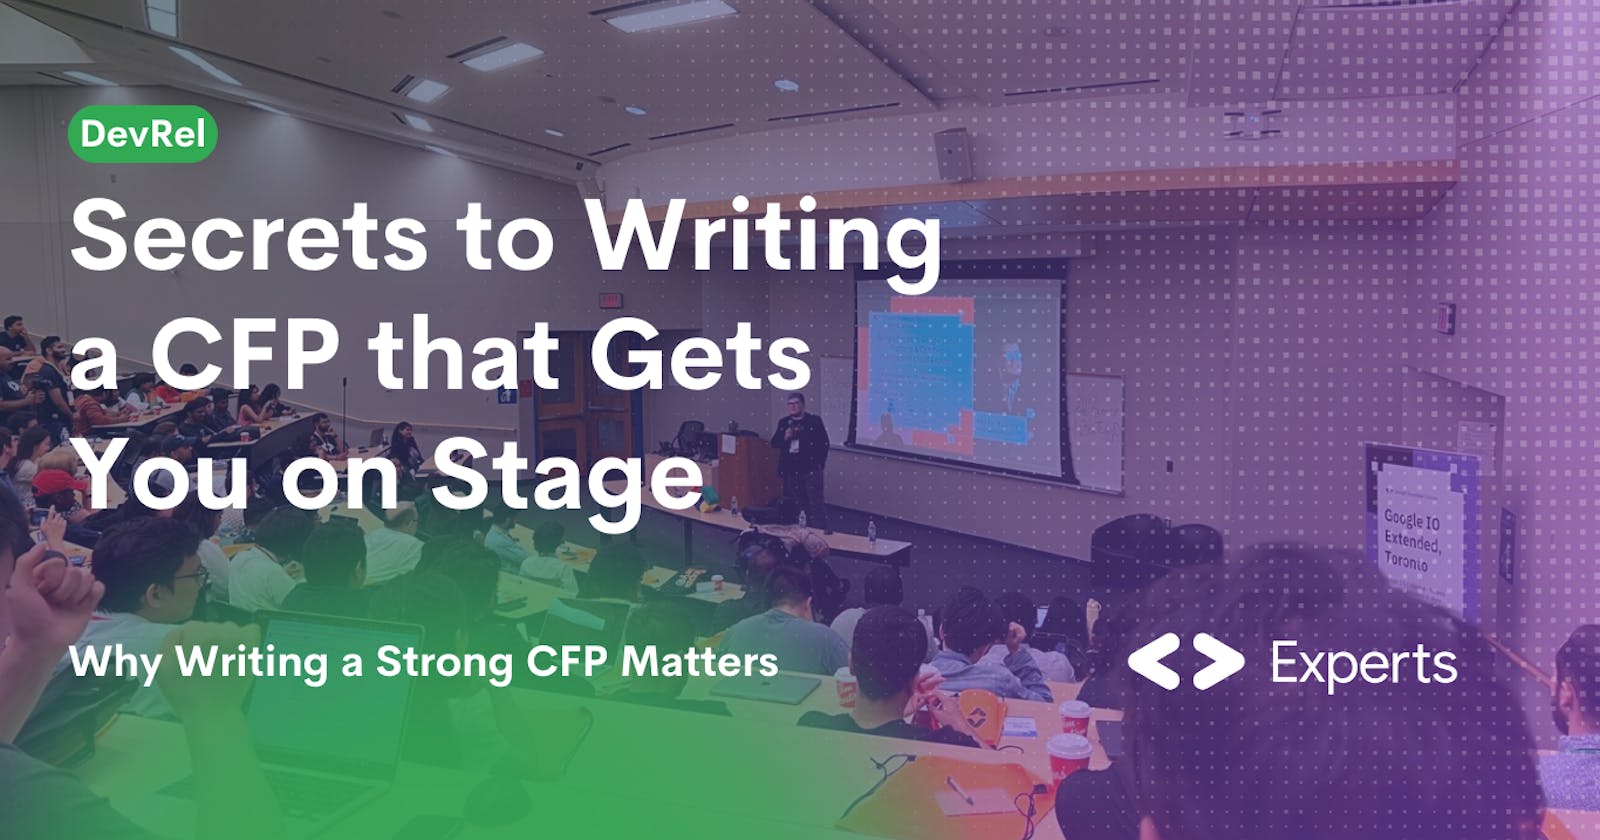 Secrets to Writing a CFP that Gets You on Stage